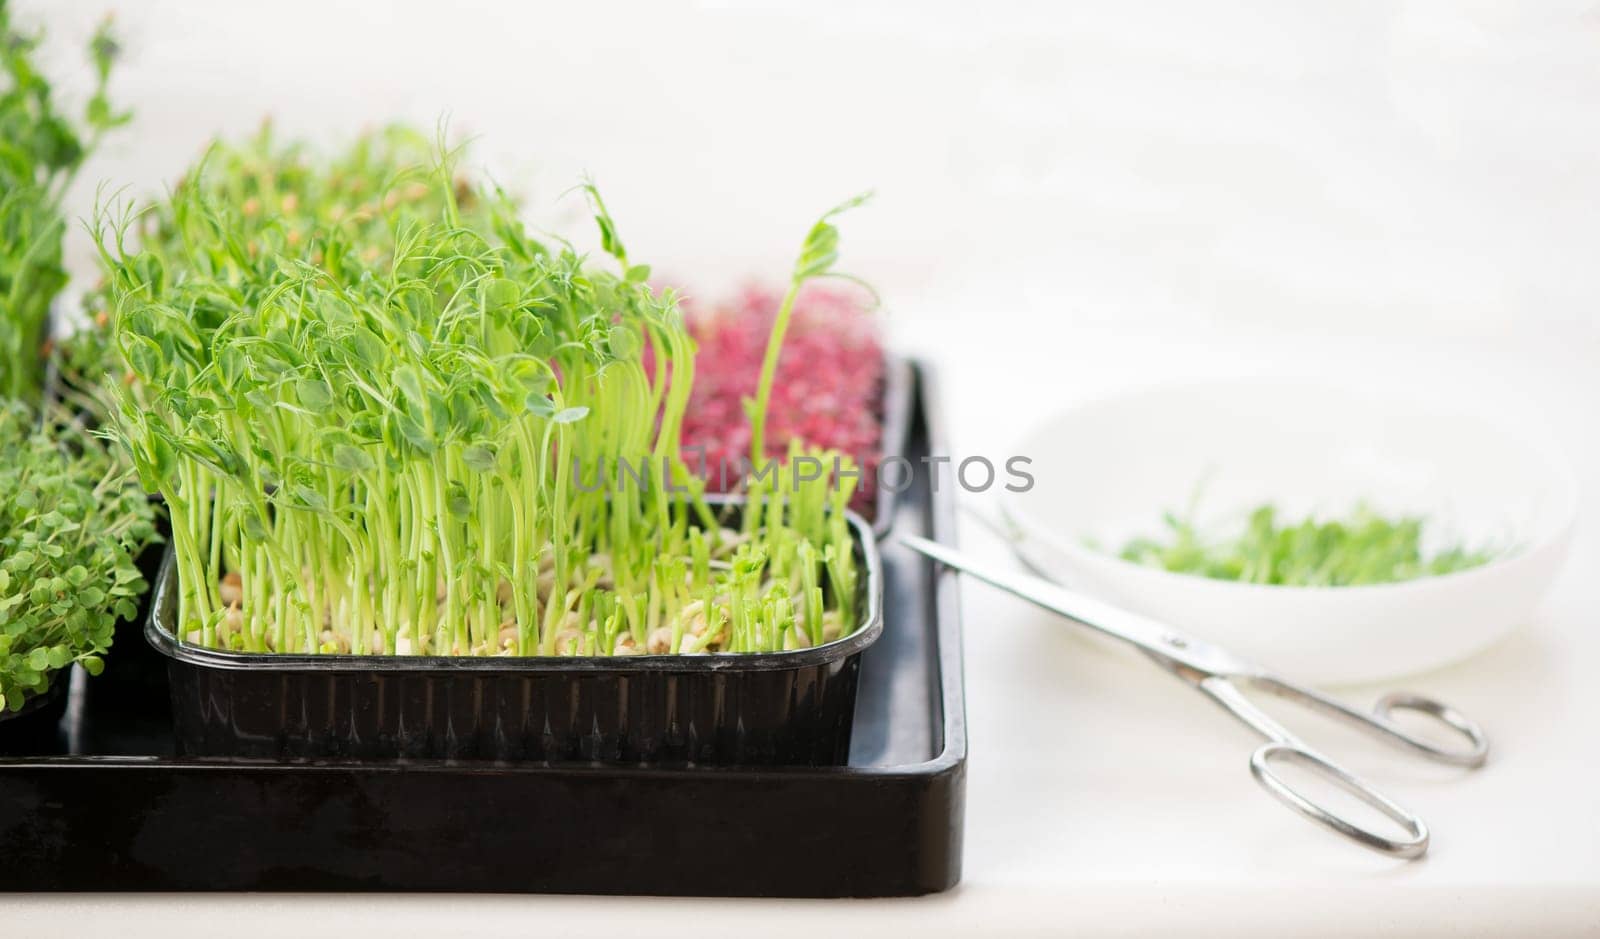 Healthy food concept, growing microgreens - boxes of peas scissors and a bowl of cut microgreens by aprilphoto